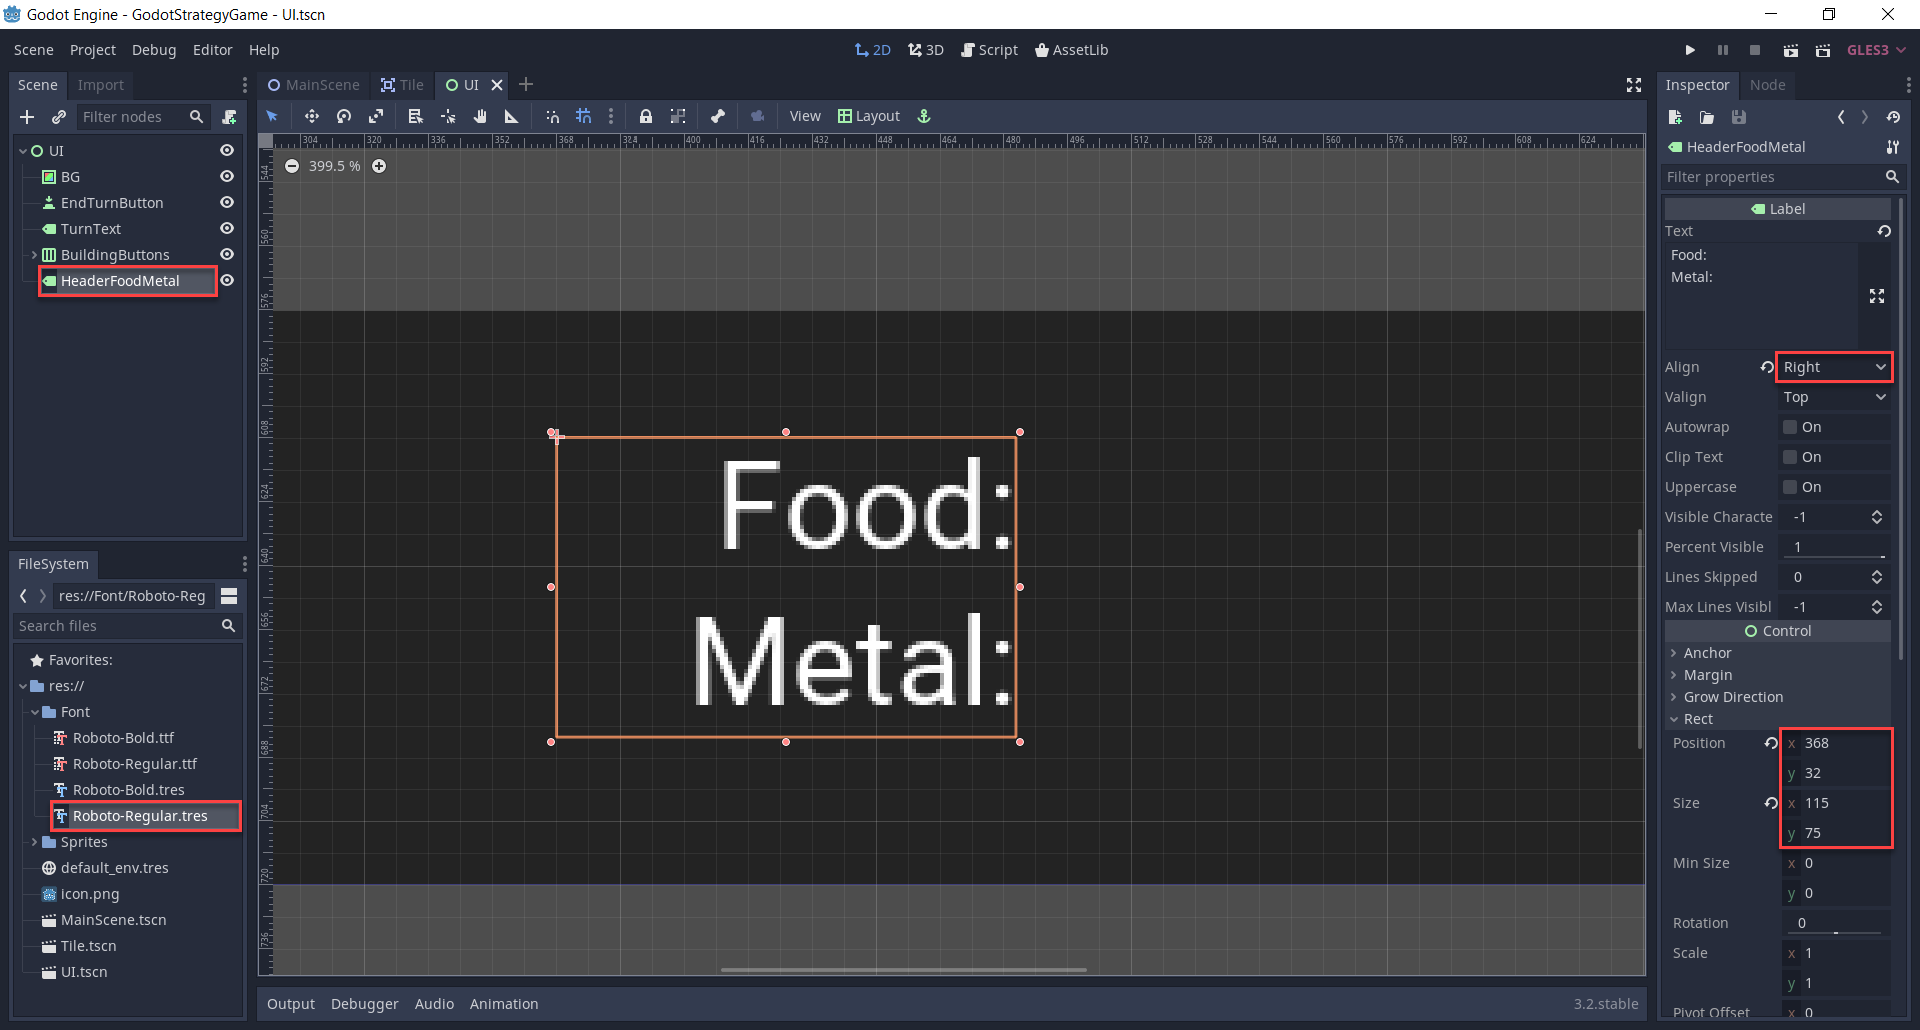 Creating the resource header text for food and metal.